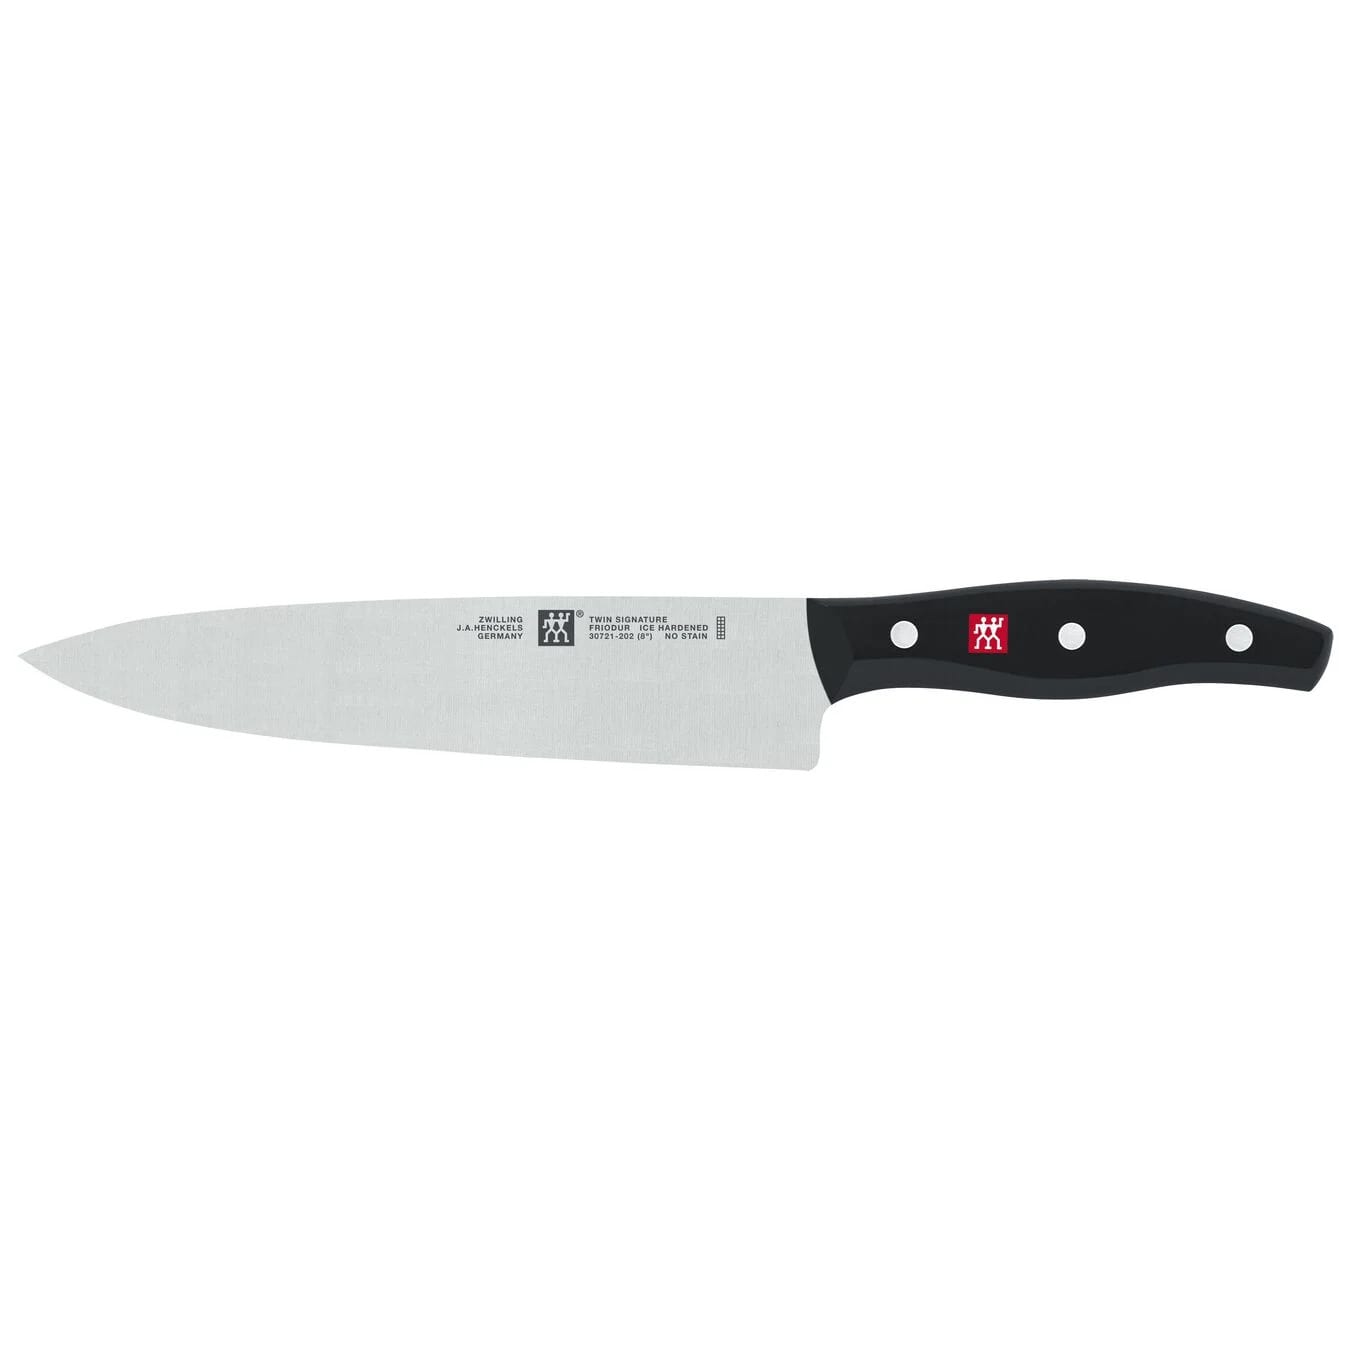 Zwilling Gourmet 8” Chef's Knife Stainless Steel Made in Germany